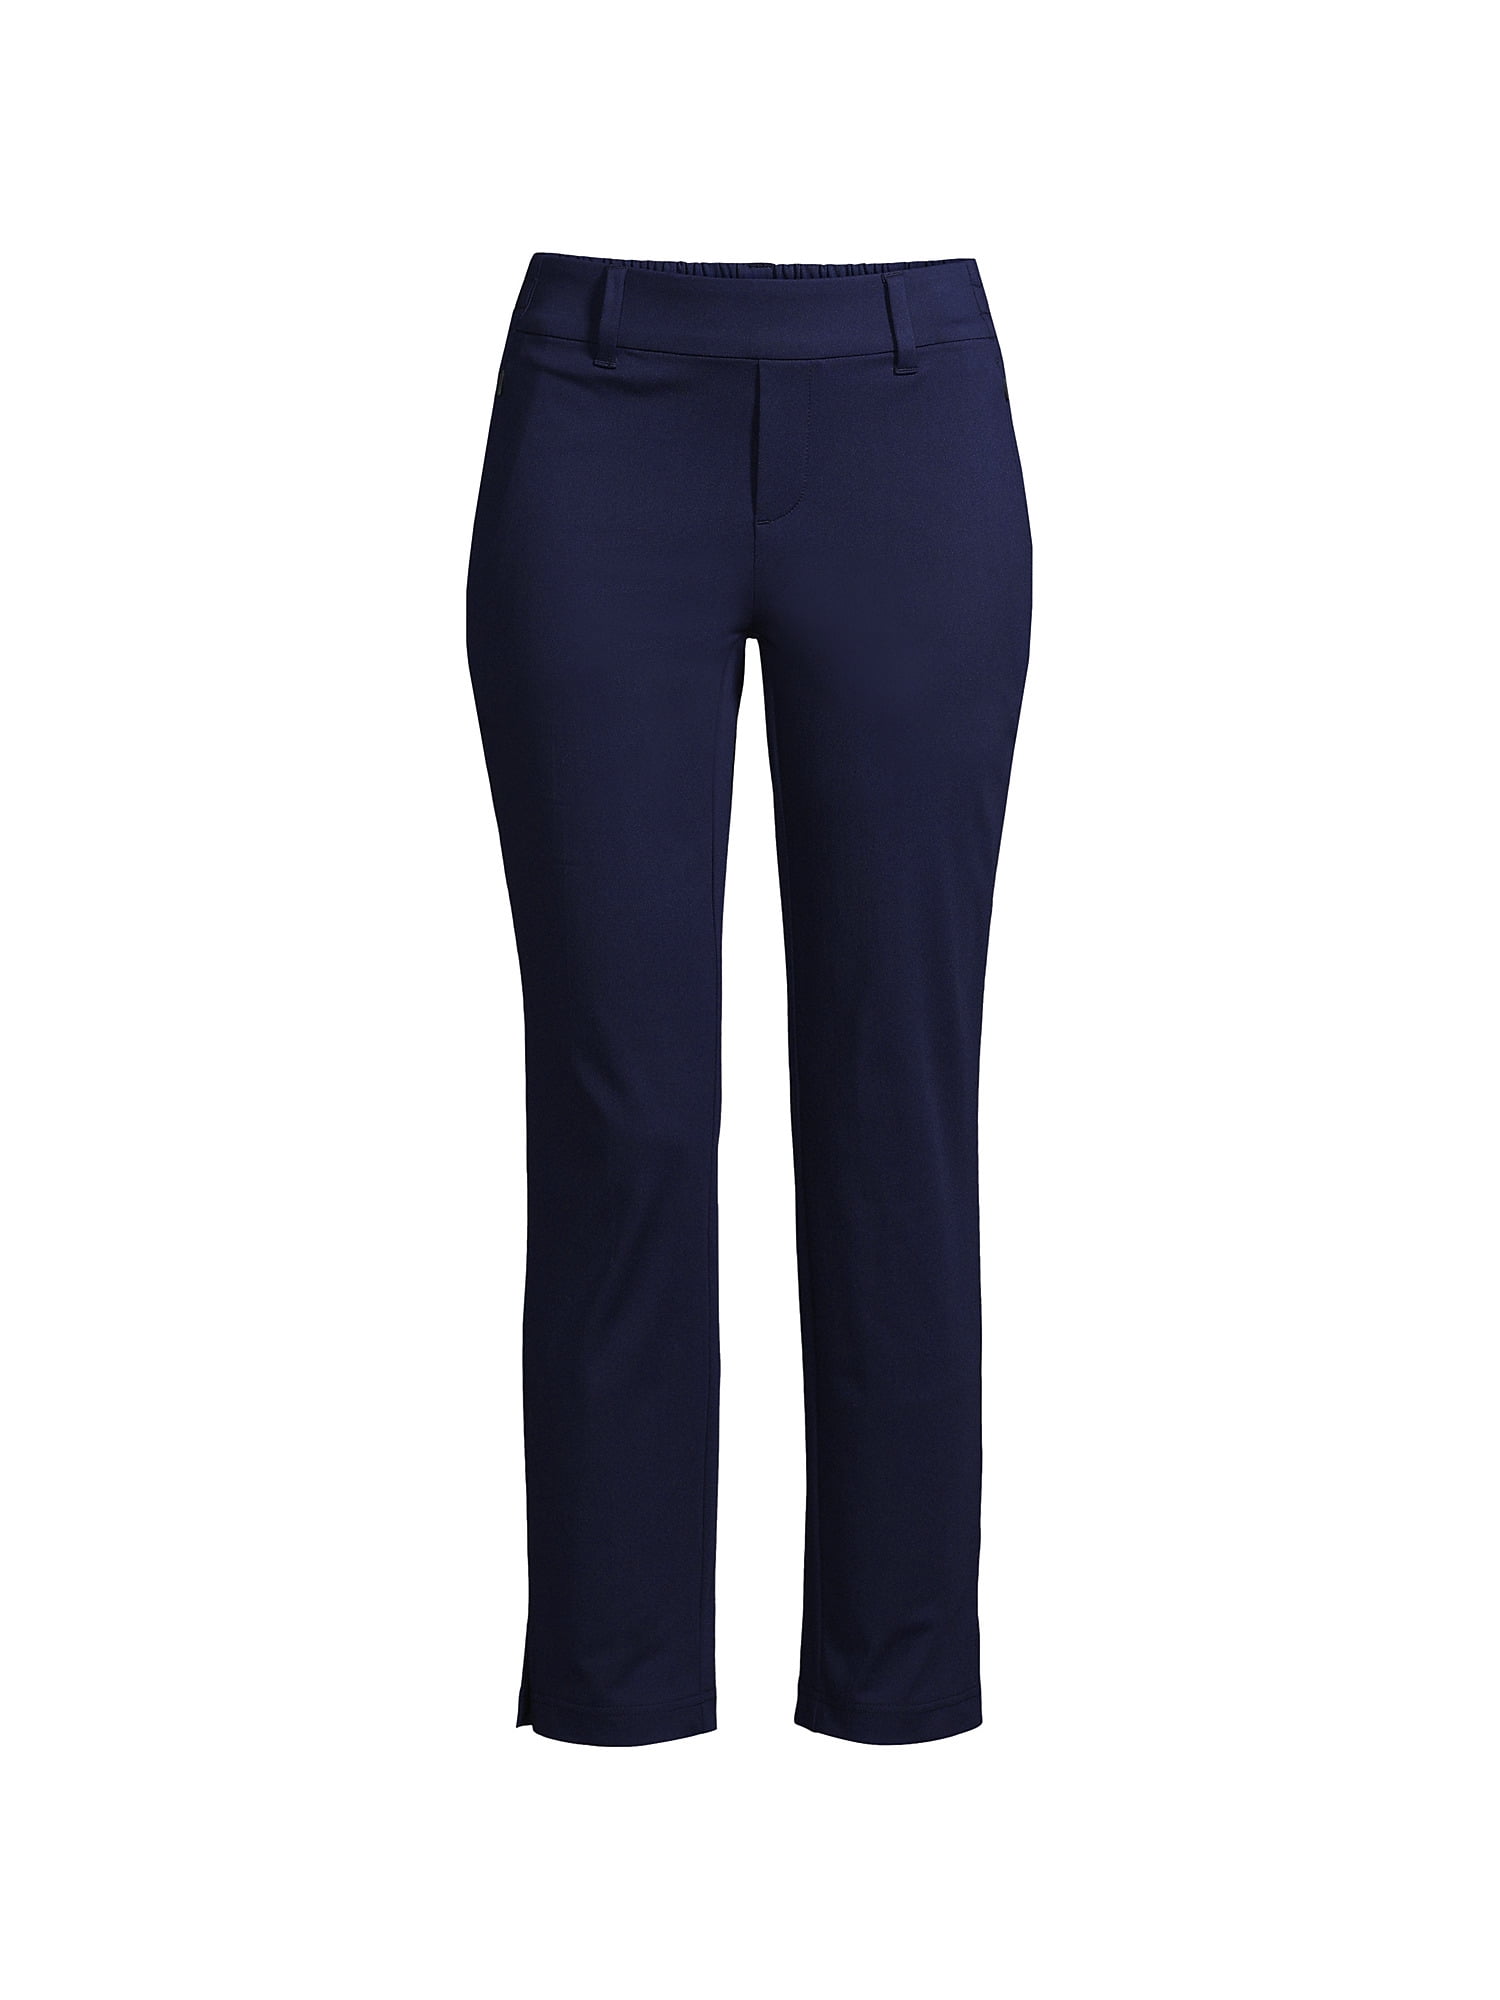 Lands' End Women's Tall Lands' End Flex Mid Rise Pull On Crop Pants 